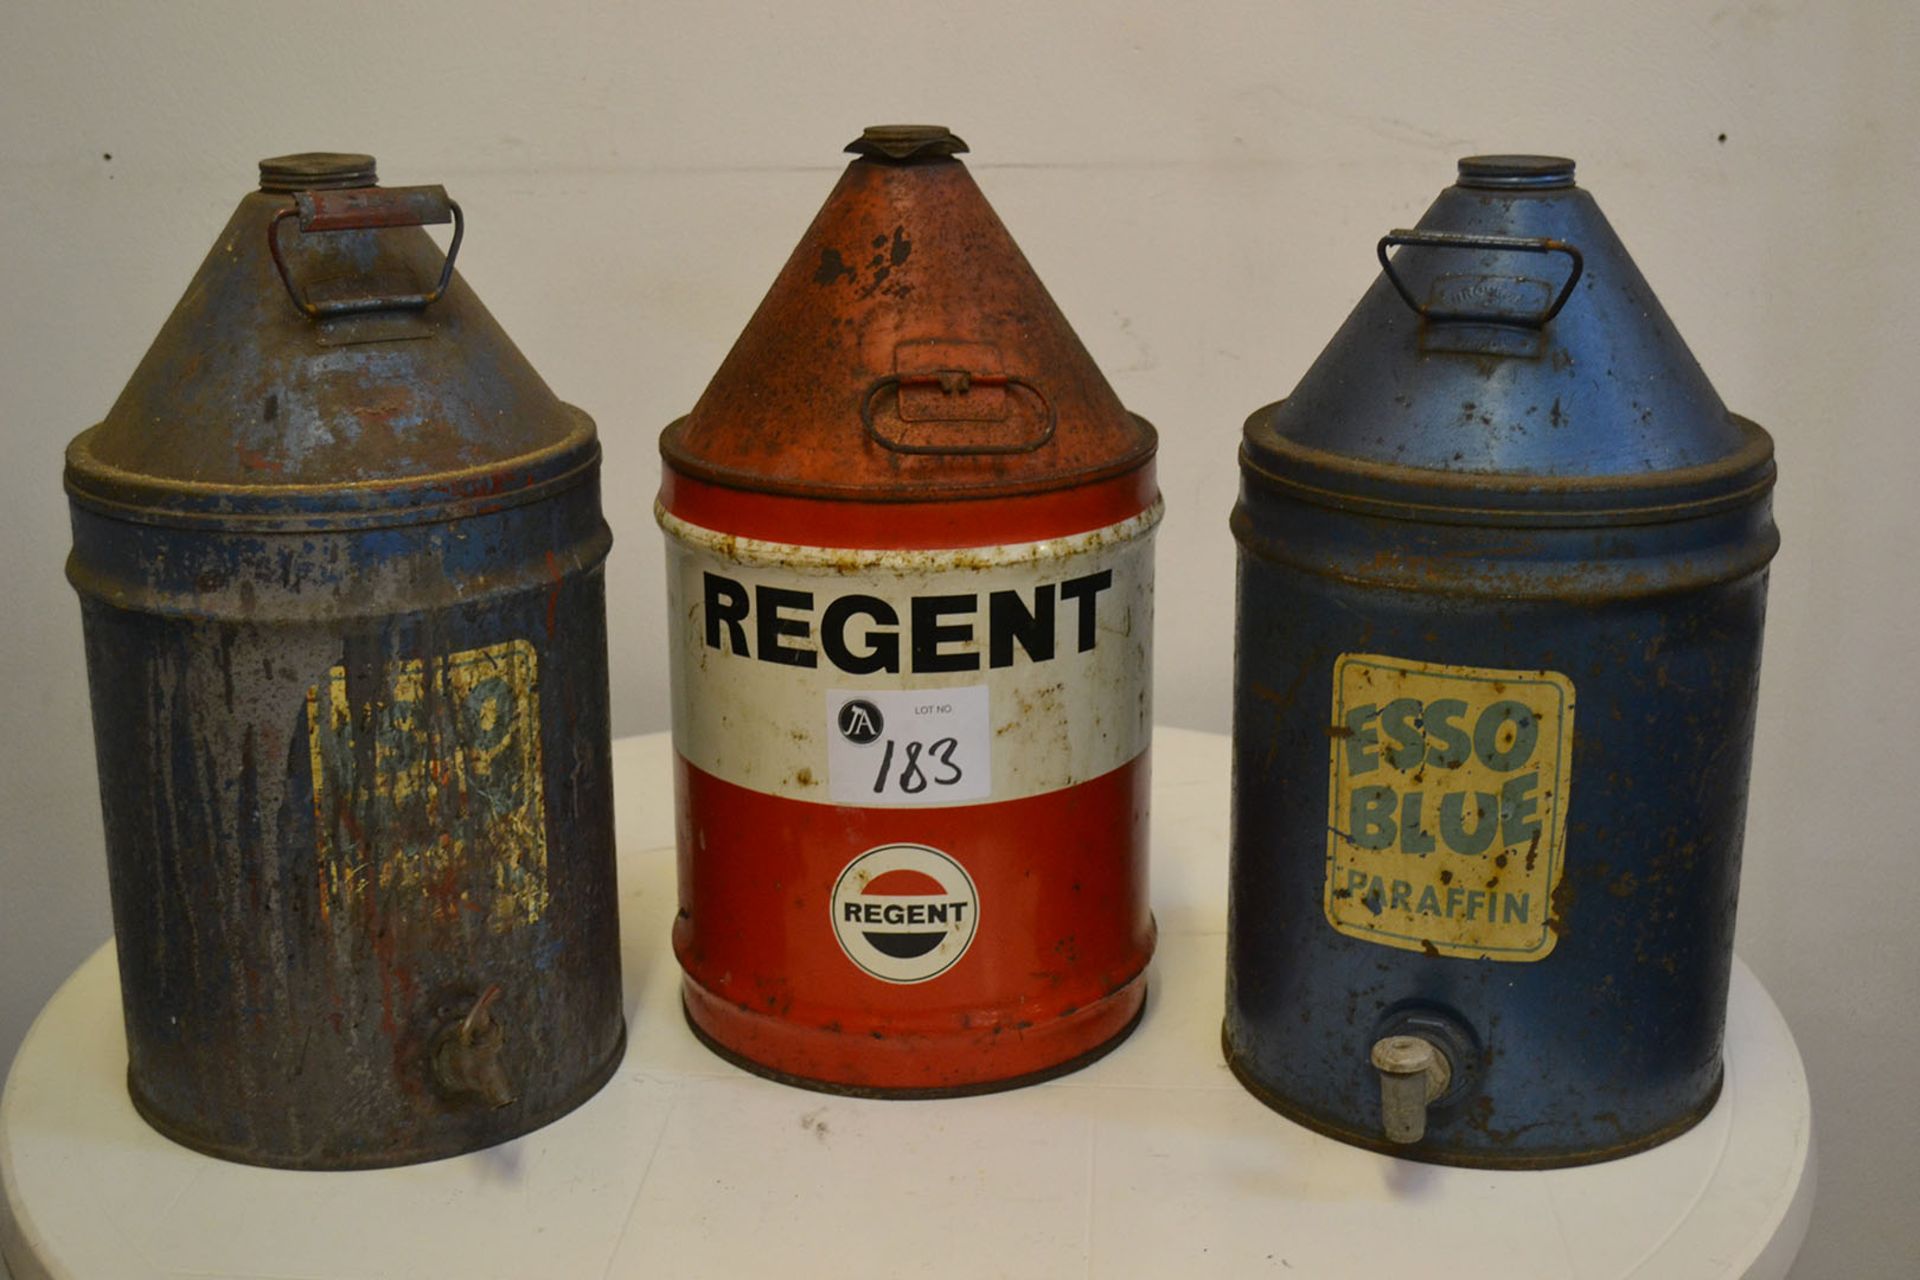 Two Esso Blue and one Regent fuel cans